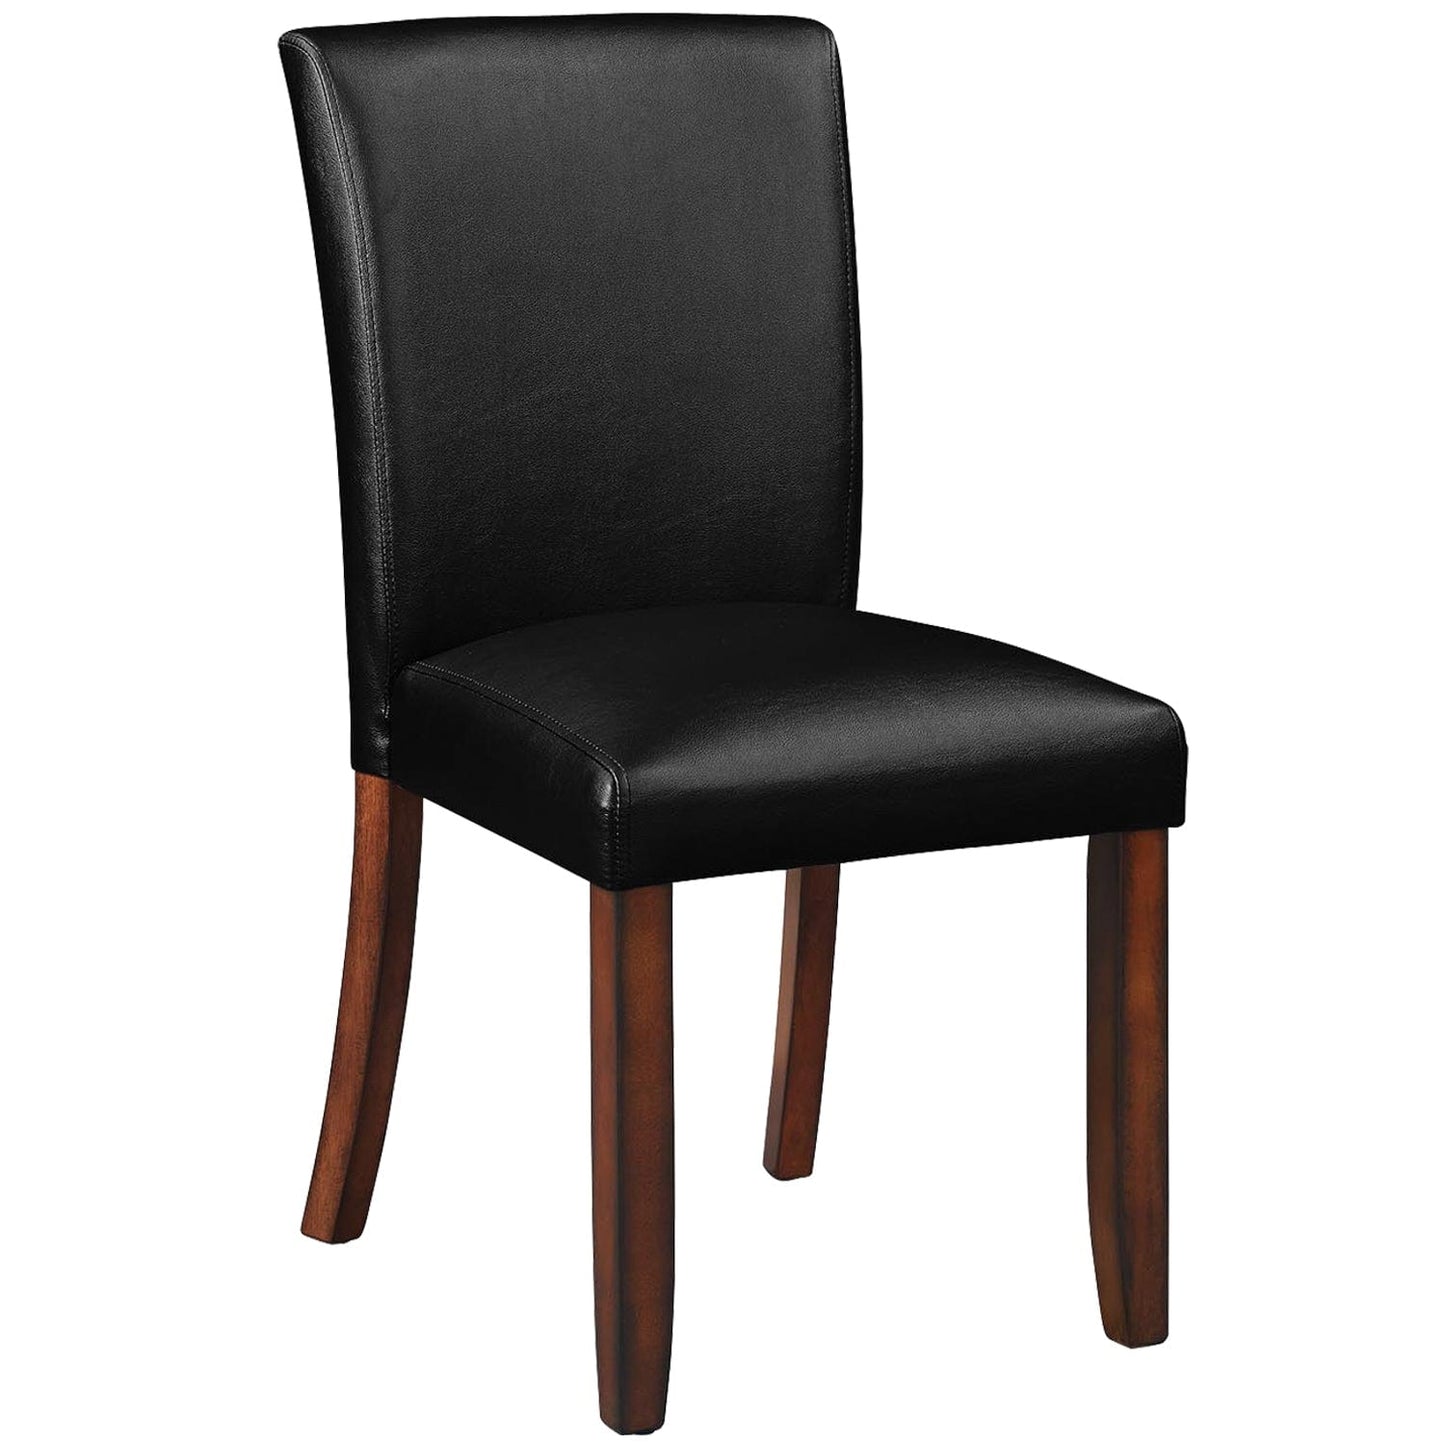 RAM Game Room Game Chair Game/Dining Chair - Chestnut